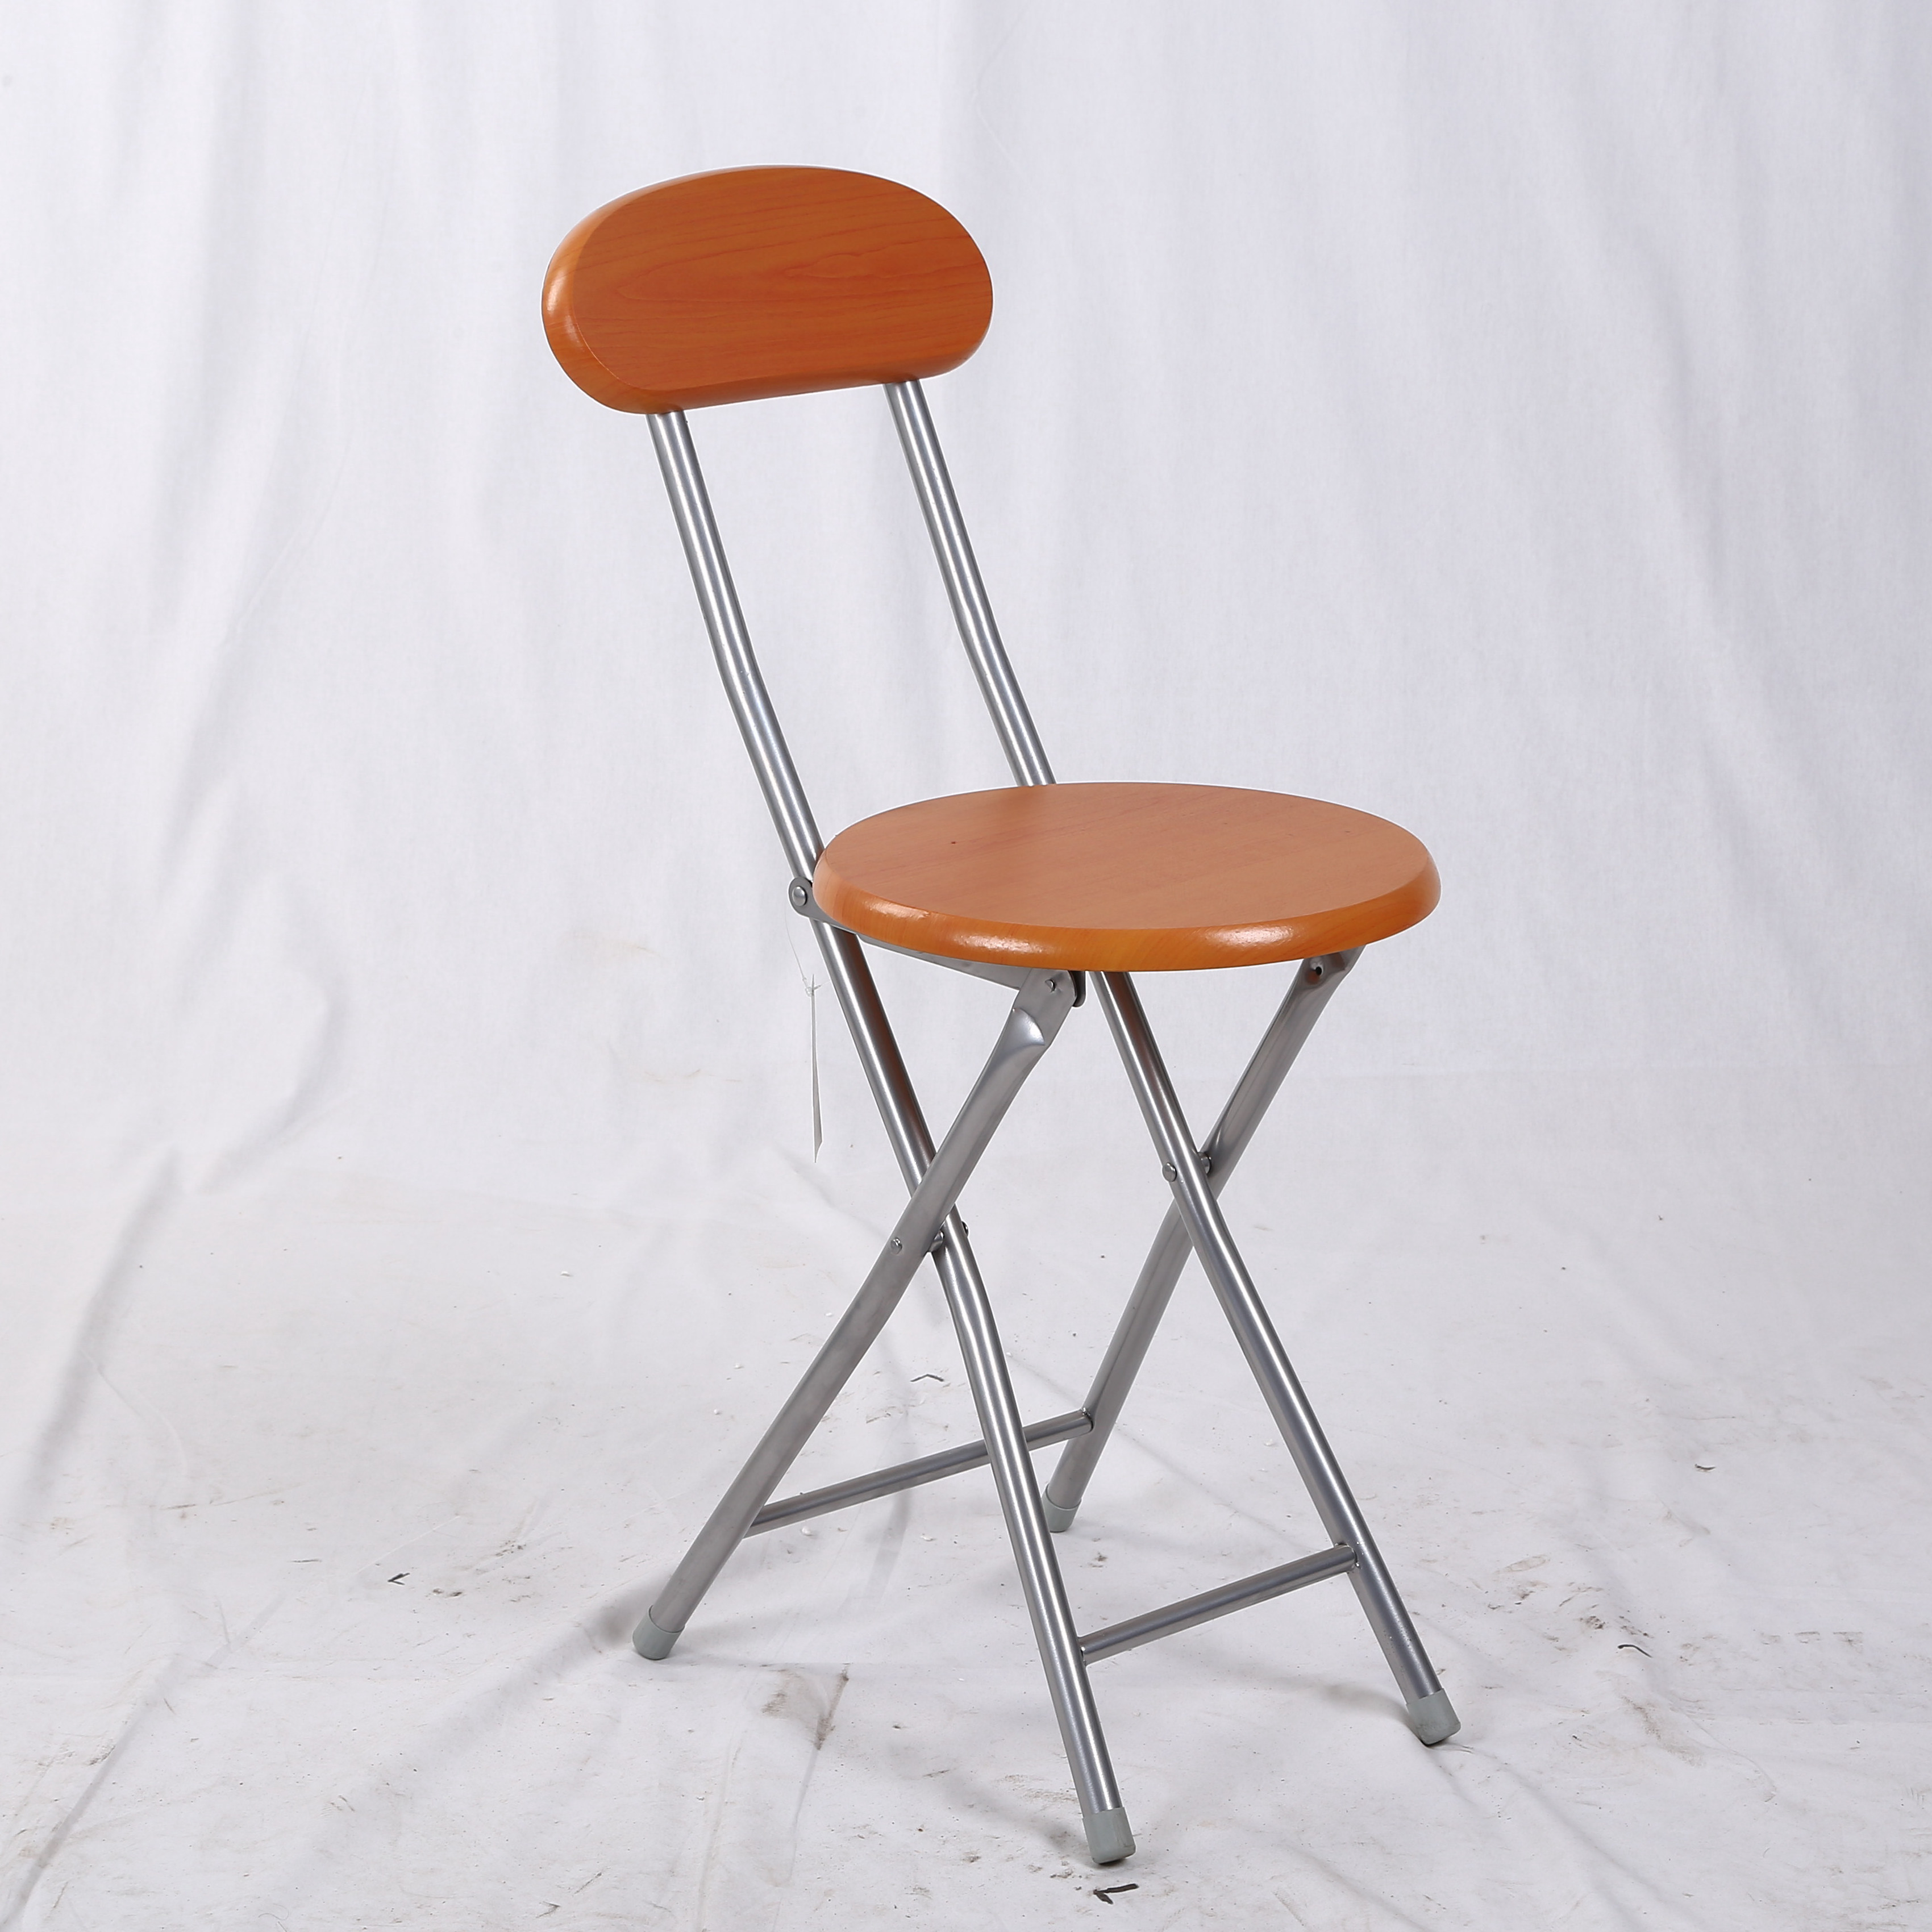  Cheap metal folding chair MDF with PVC foldable chair